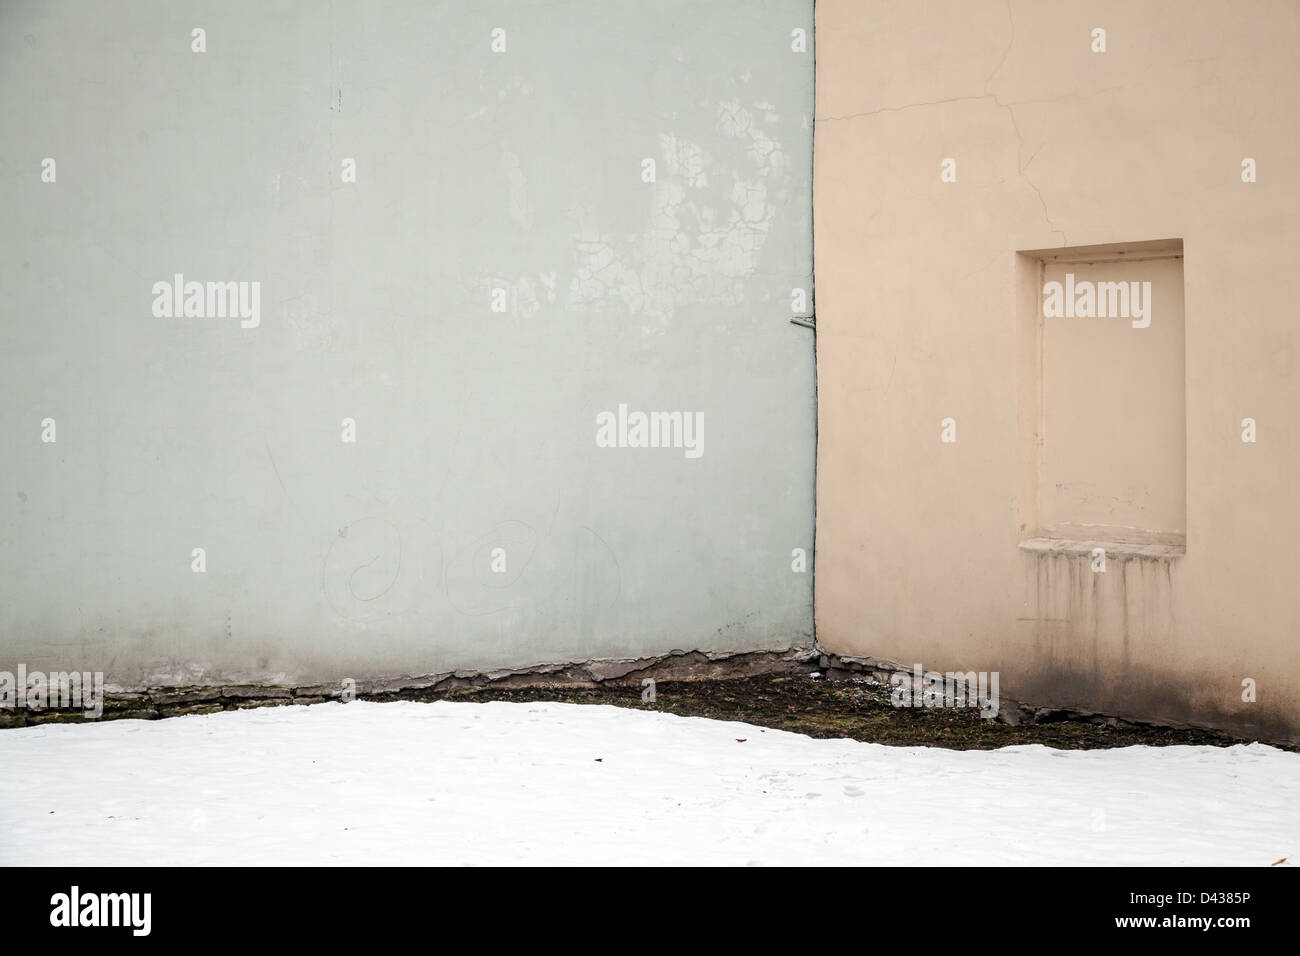 Abstract city fragment with walls and bricked-up window Stock Photo